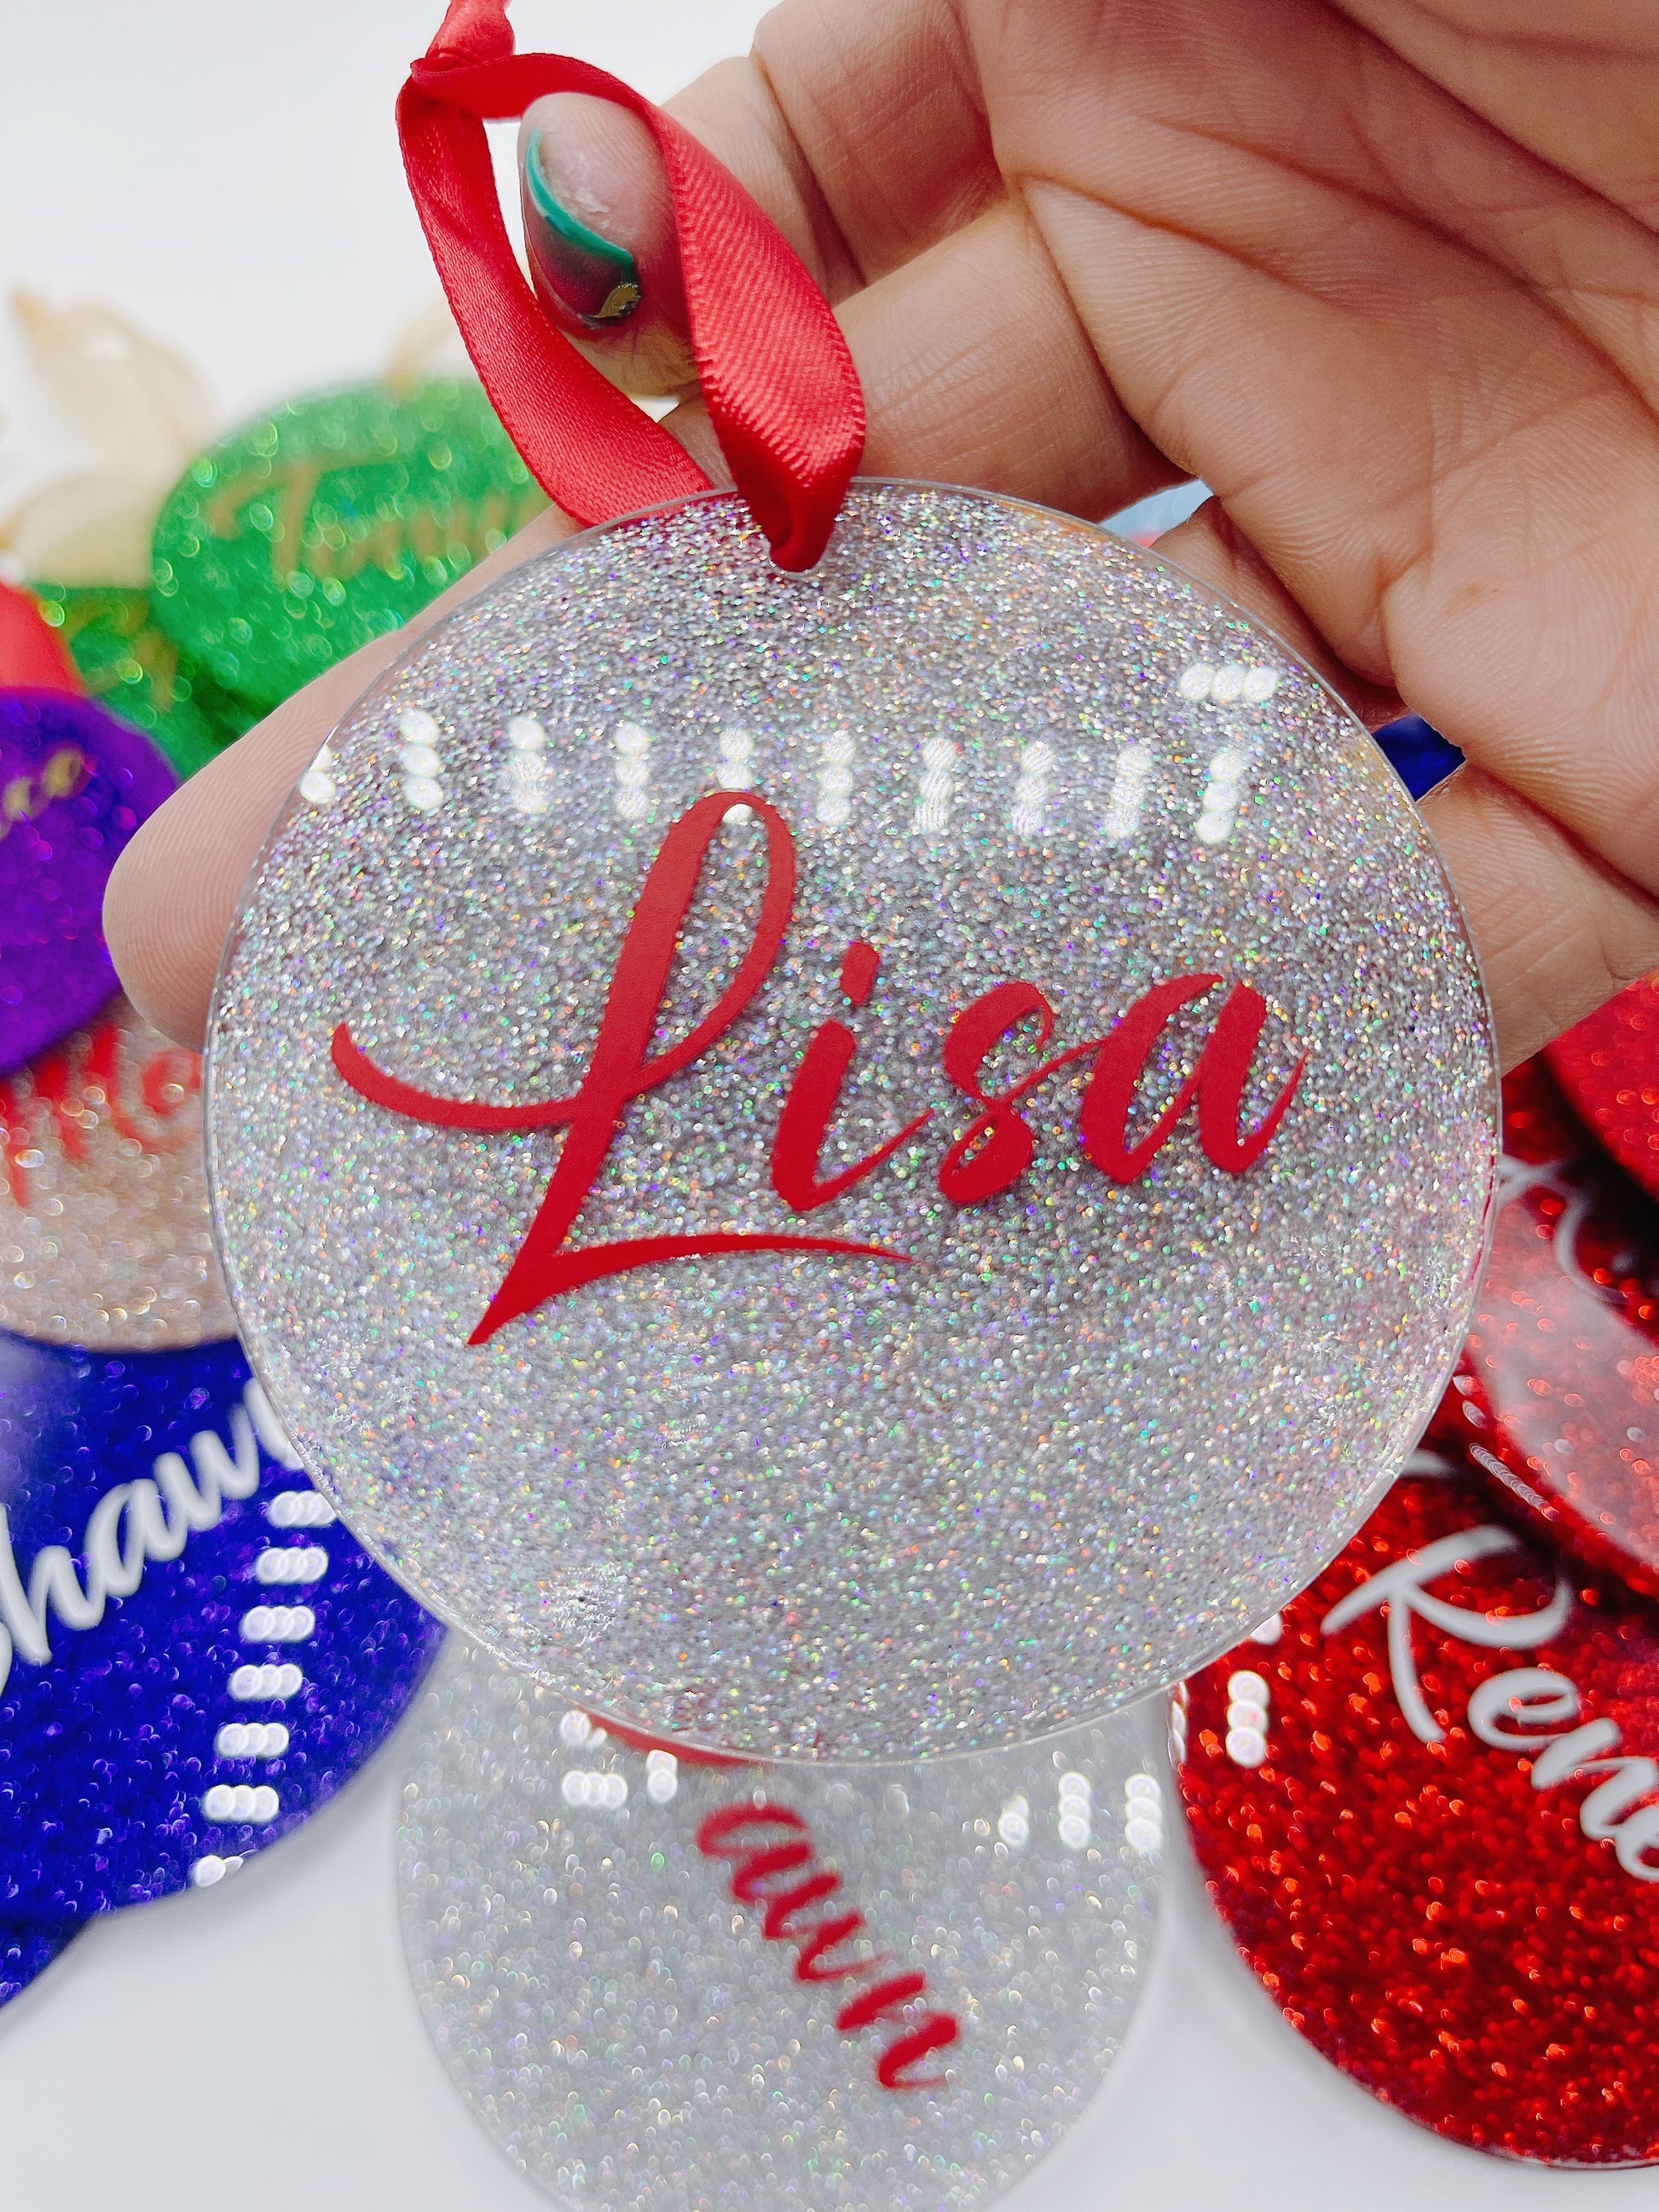 How to Make Personalized Glitter Ornaments